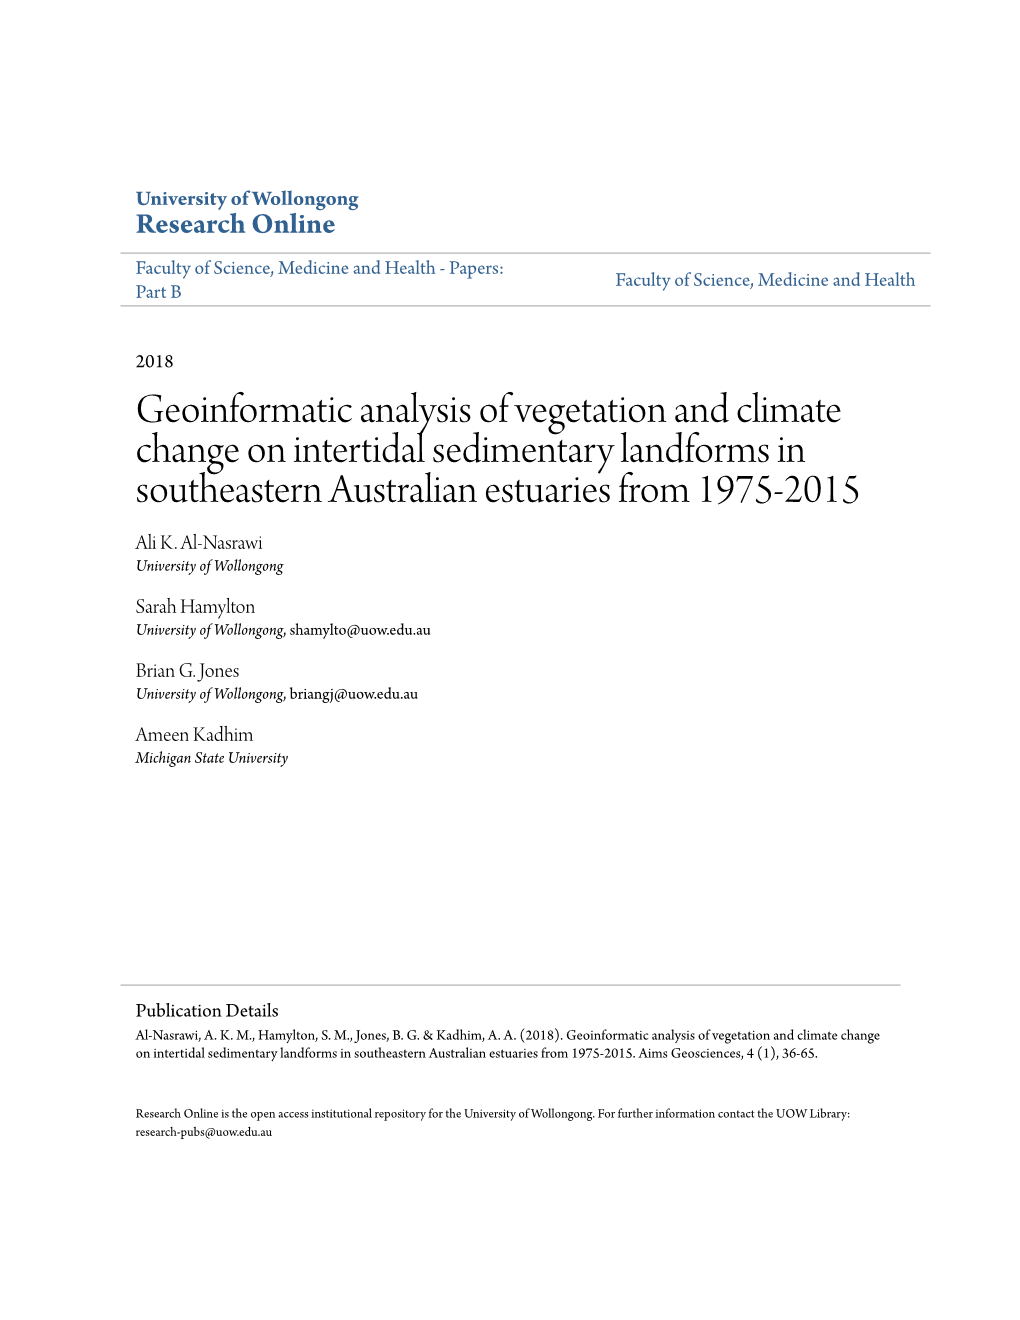 Geoinformatic Analysis of Vegetation and Climate Change on Intertidal Sedimentary Landforms in Southeastern Australian Estuaries from 1975-2015 Ali K